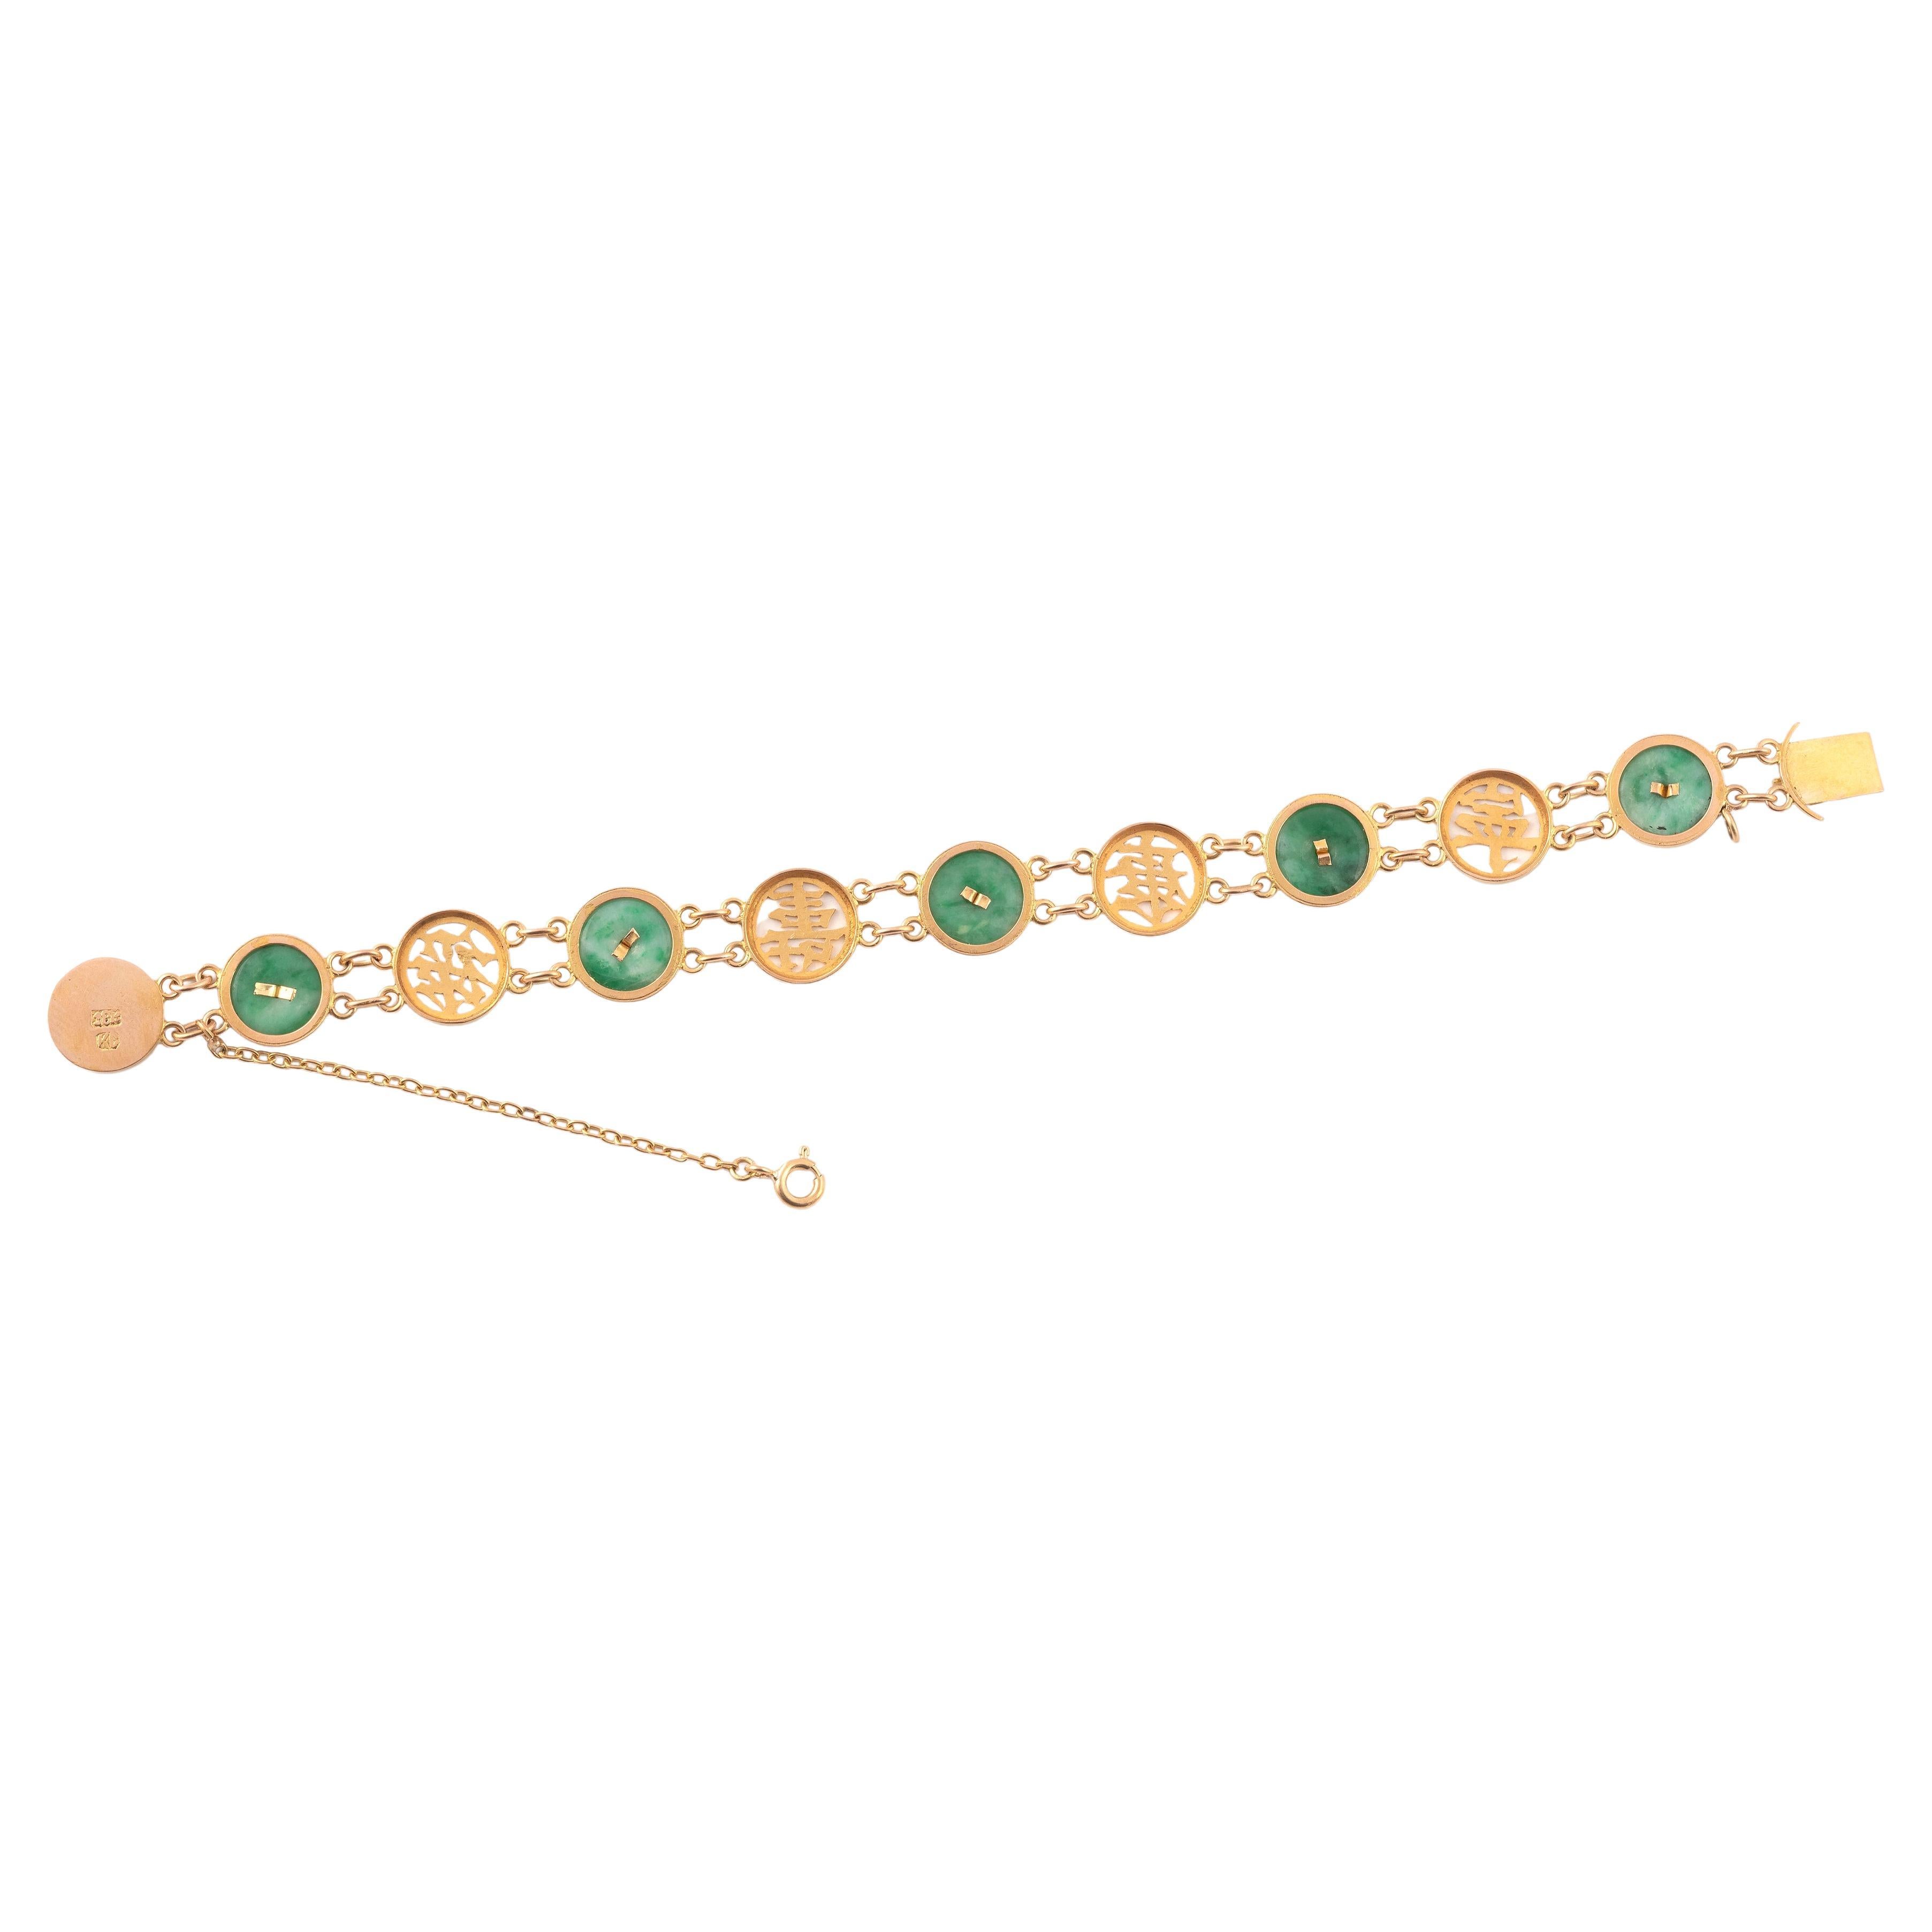 Yellow gold bracelet, adorned with openwork circular medallions of Asian characters alternated with jadeite jade discs. Wrist circumference: 17 cm.
Weight: 10.9g.